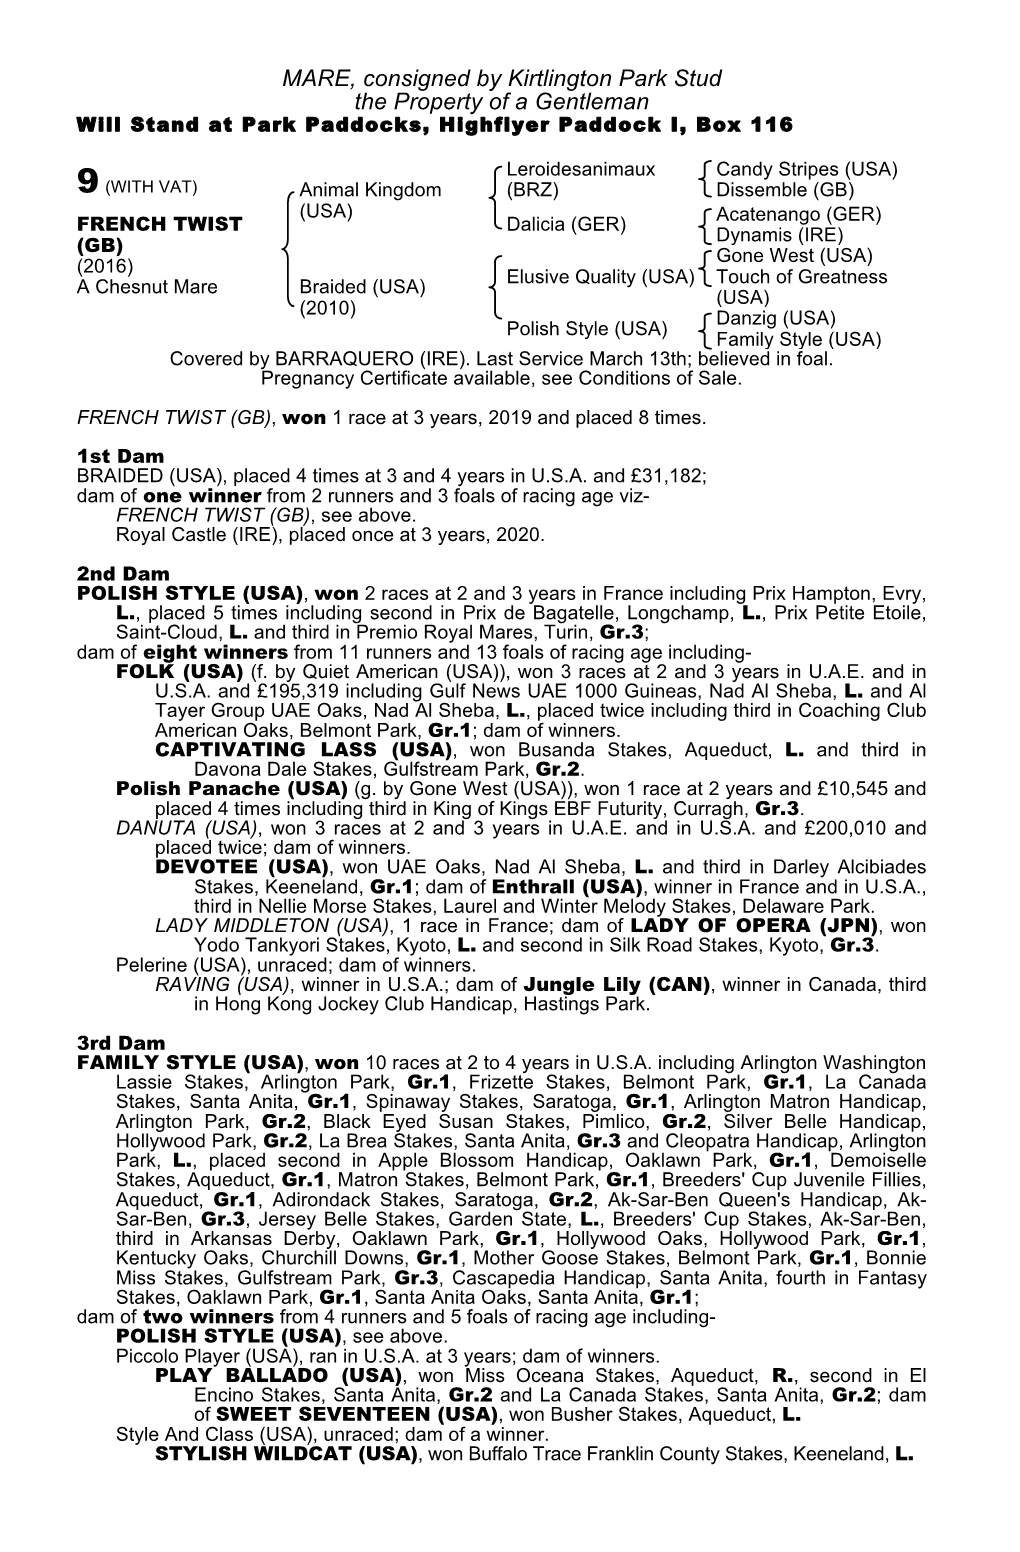 MARE, Consigned by Kirtlington Park Stud the Property of a Gentleman Will Stand at Park Paddocks, Highflyer Paddock I, Box 116